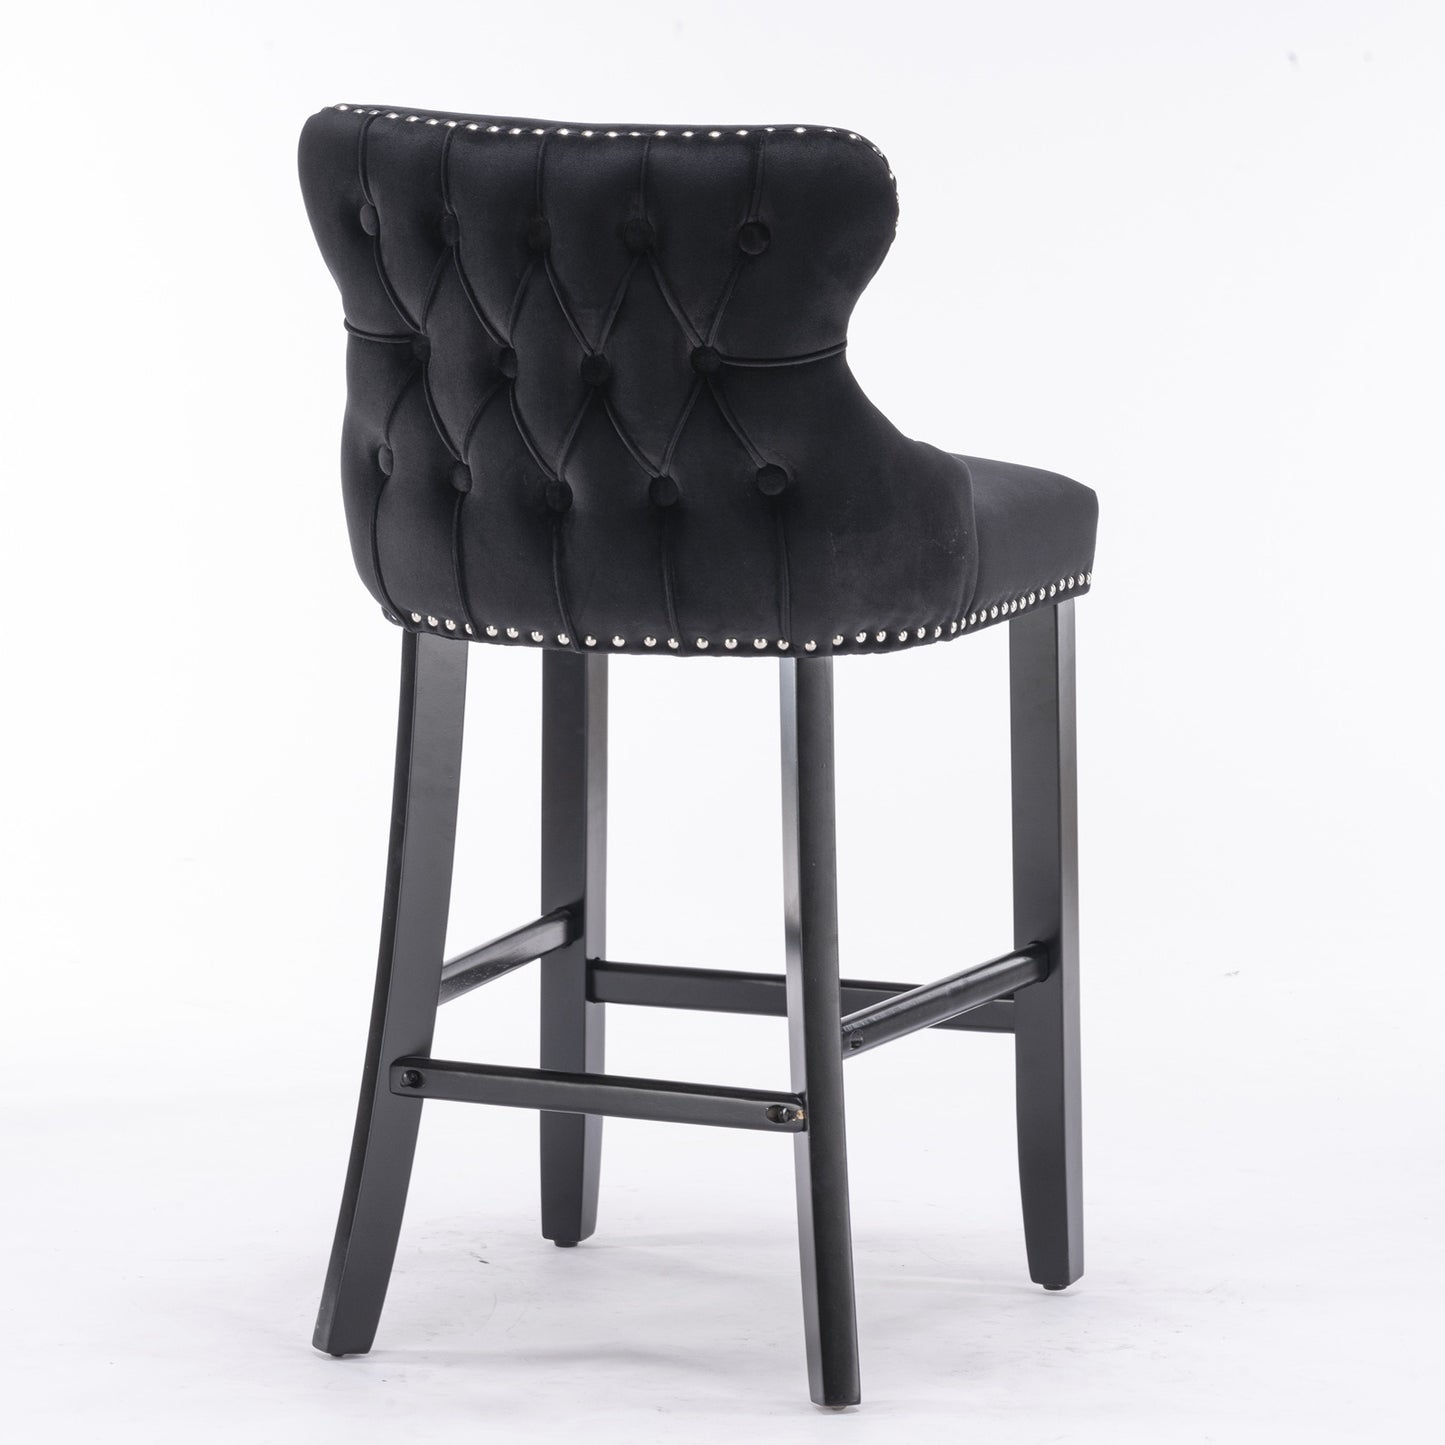 A&A Furniture,Contemporary Velvet Upholstered Wing-Back Barstools with Button Tufted Decoration and Wooden Legs, and Chrome Nailhead Trim, Leisure Style Bar Chairs,Bar stools,Set of 2 (Black),SW1824BK